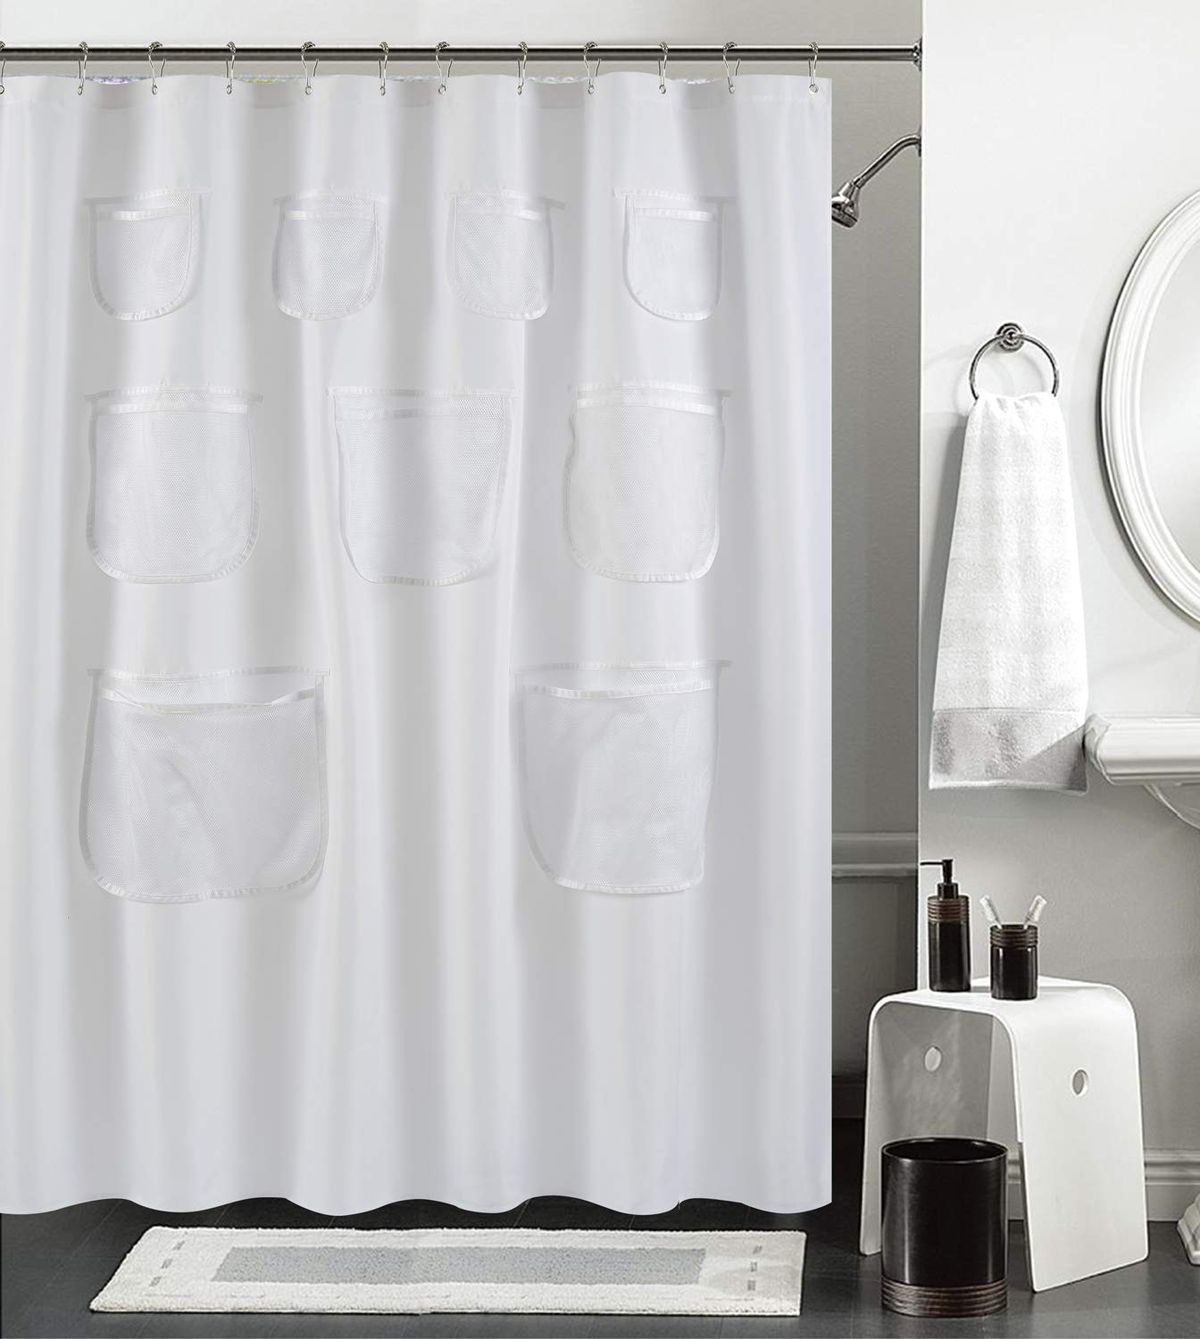 PVC Free Kent & West PEVA Shower Curtain Liner 72 x 84 Bottom Magnets Clear Durable 9 Gauge USA Made 